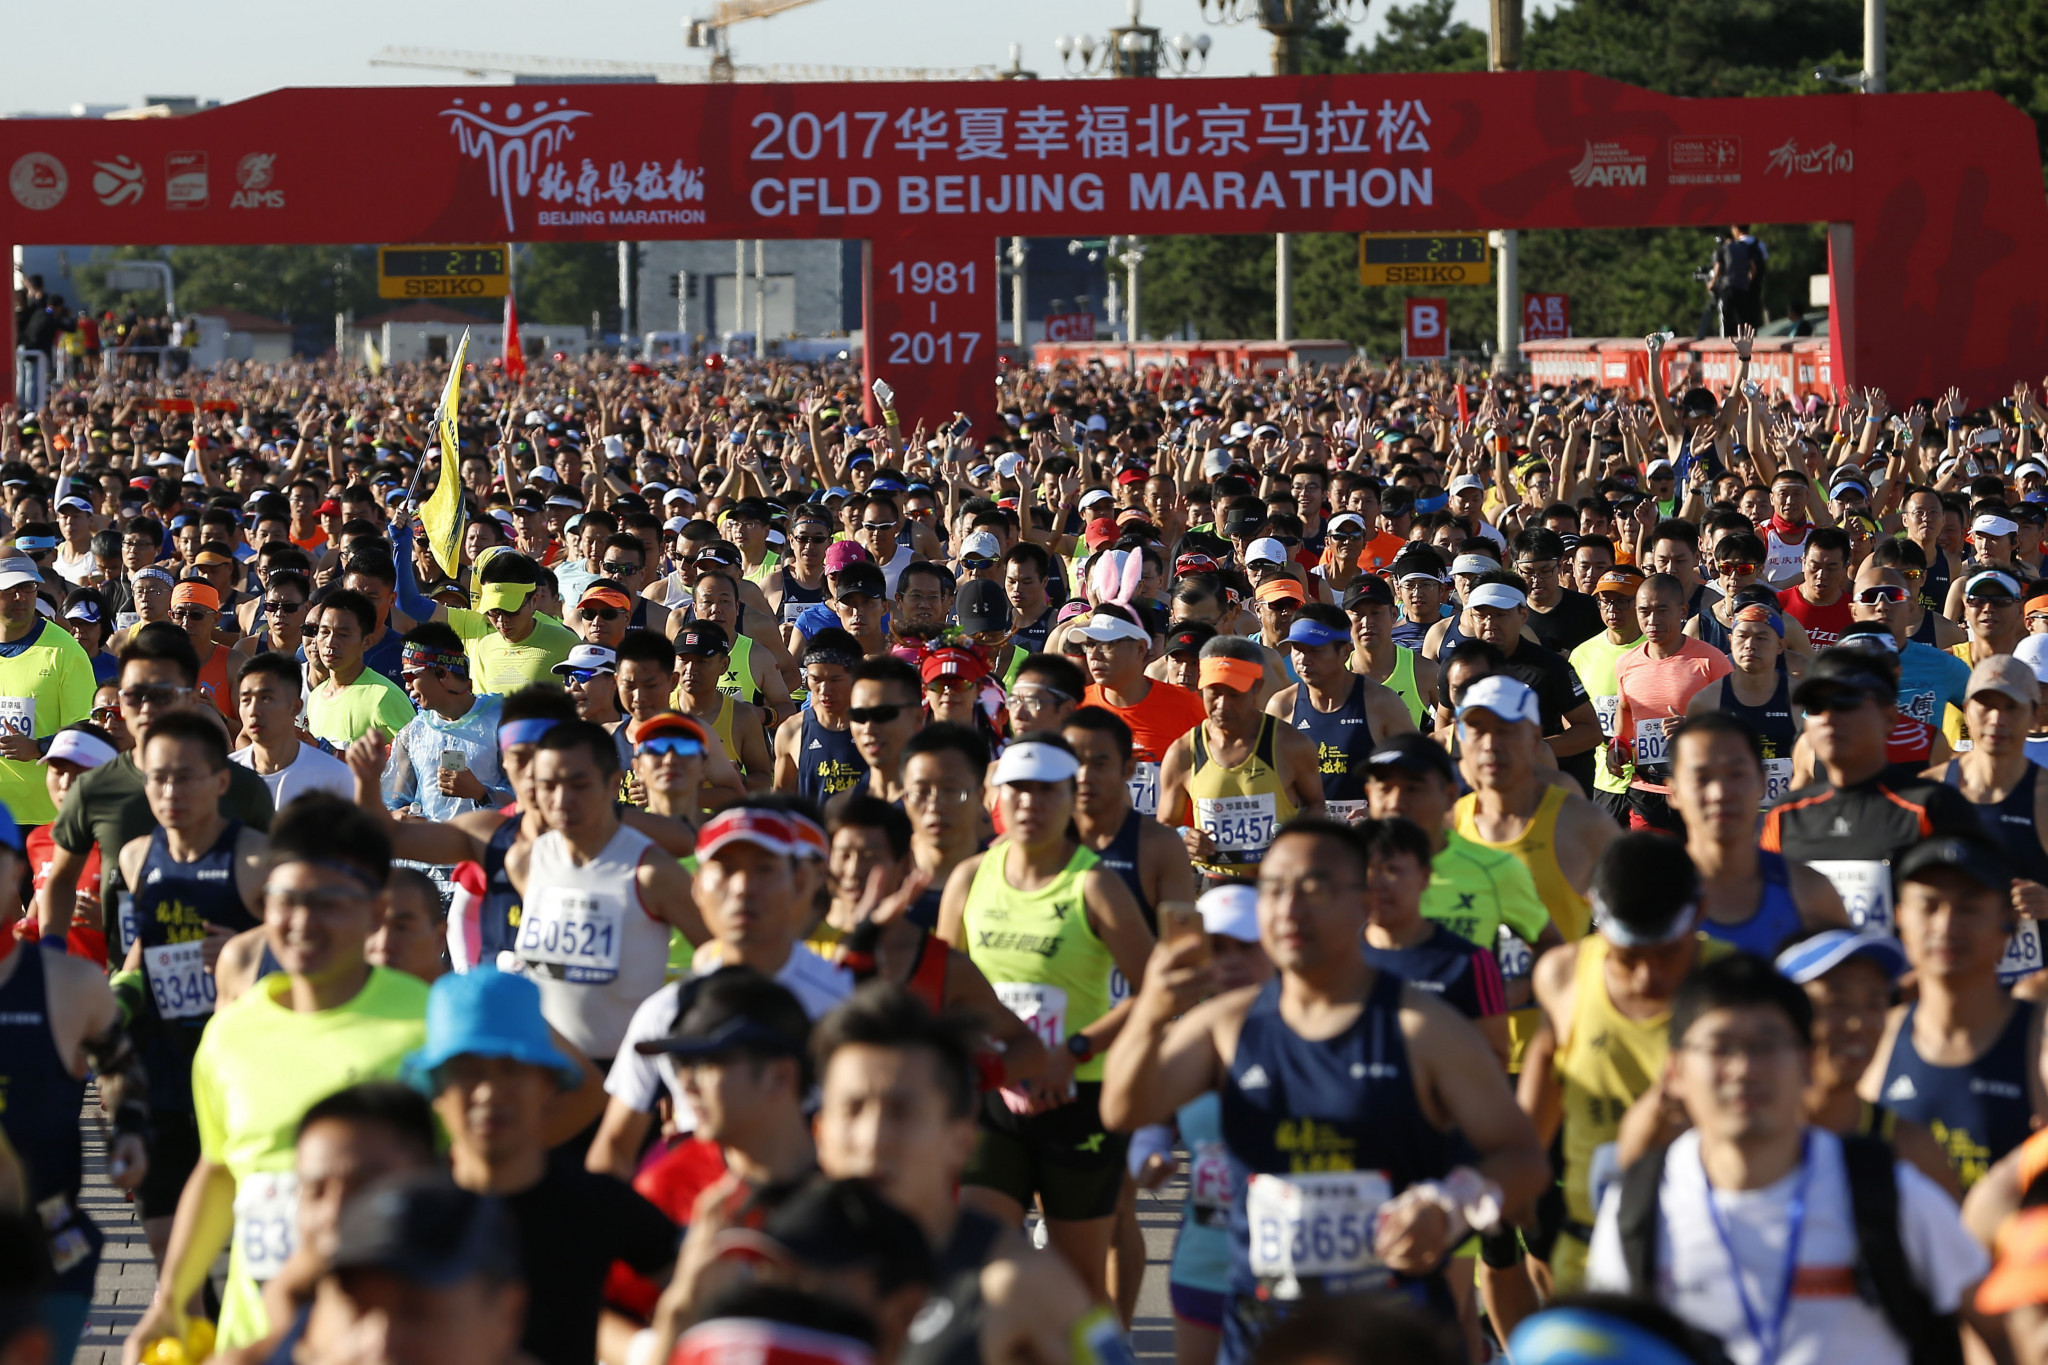 Wang Nan, vice-president of the Chinese Athletics Association, says marathon running in booming in his country ©Getty Images